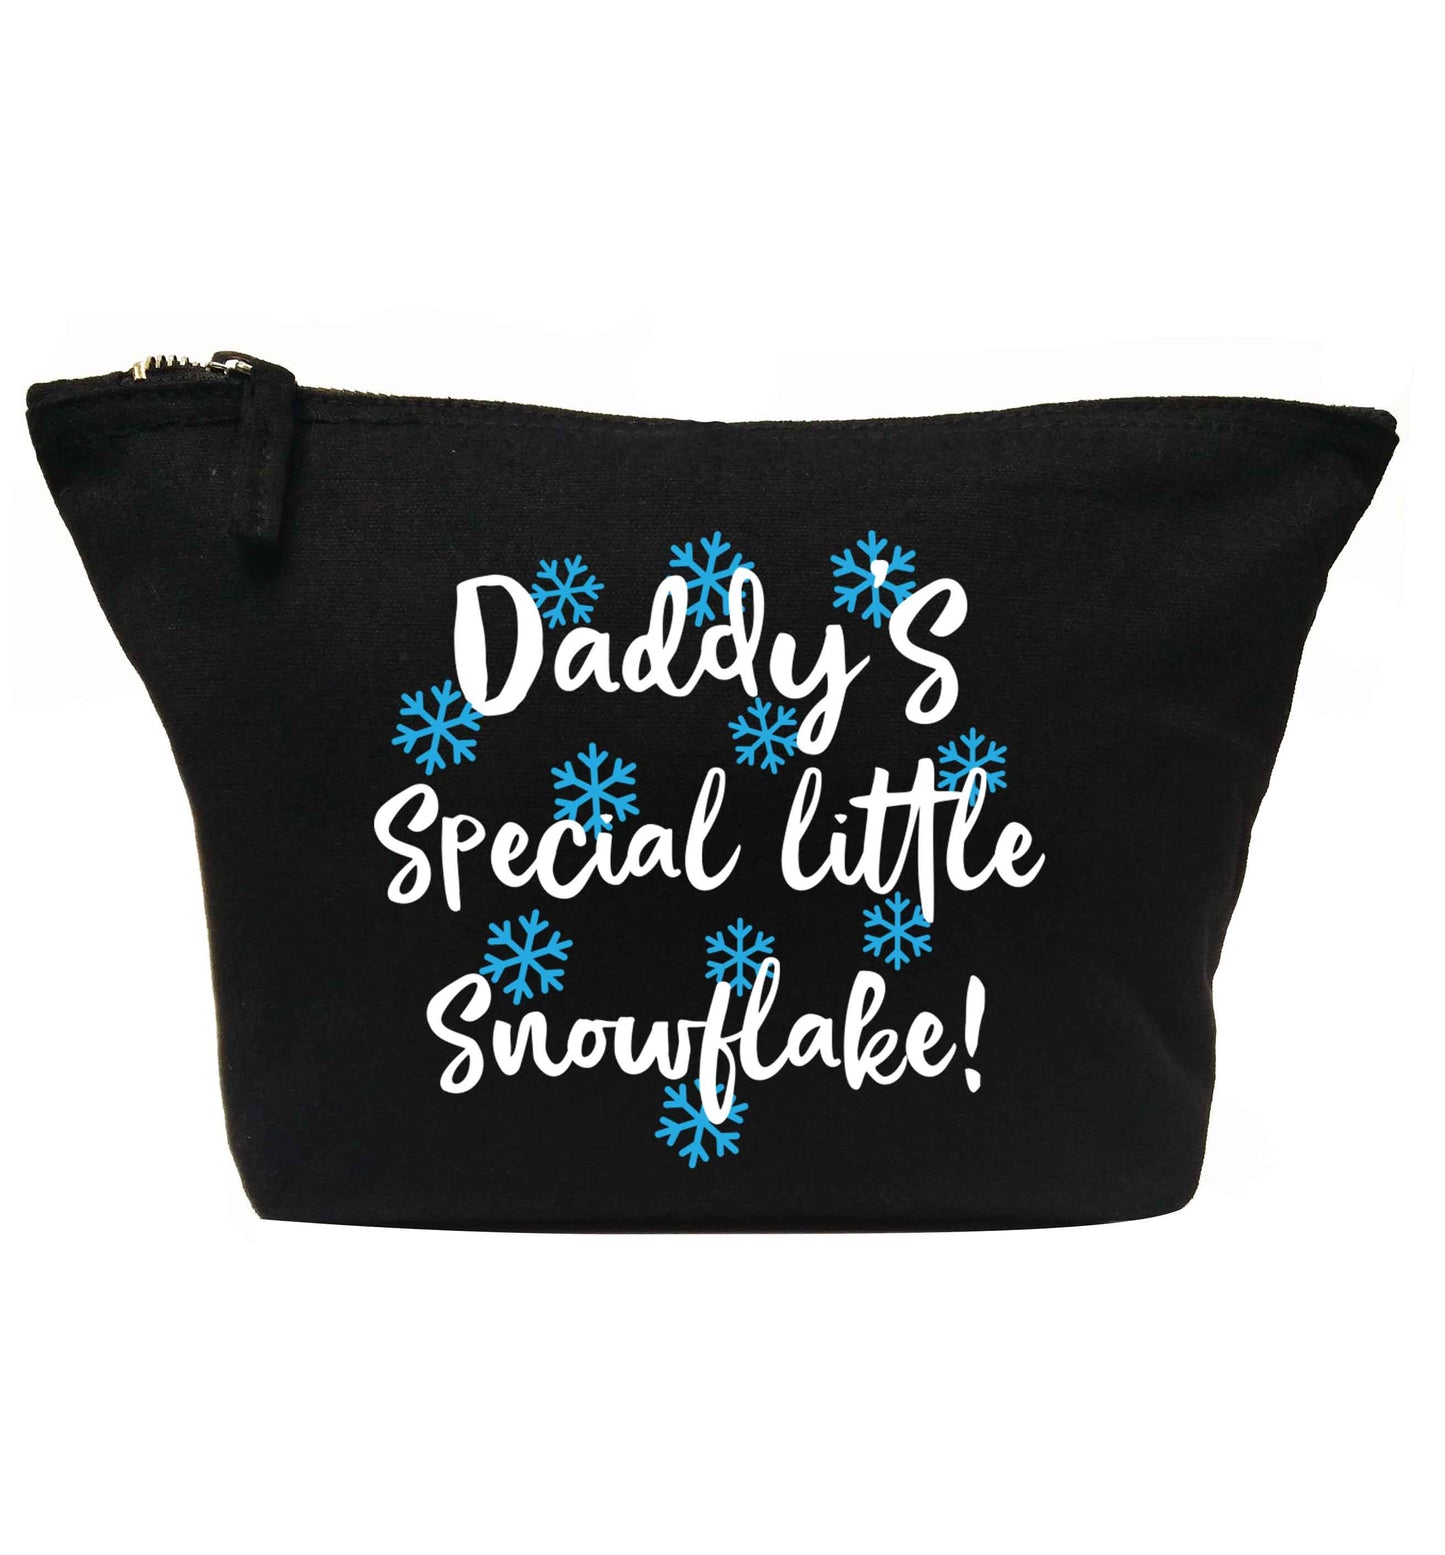 Daddy's special little snowflake | makeup / wash bag